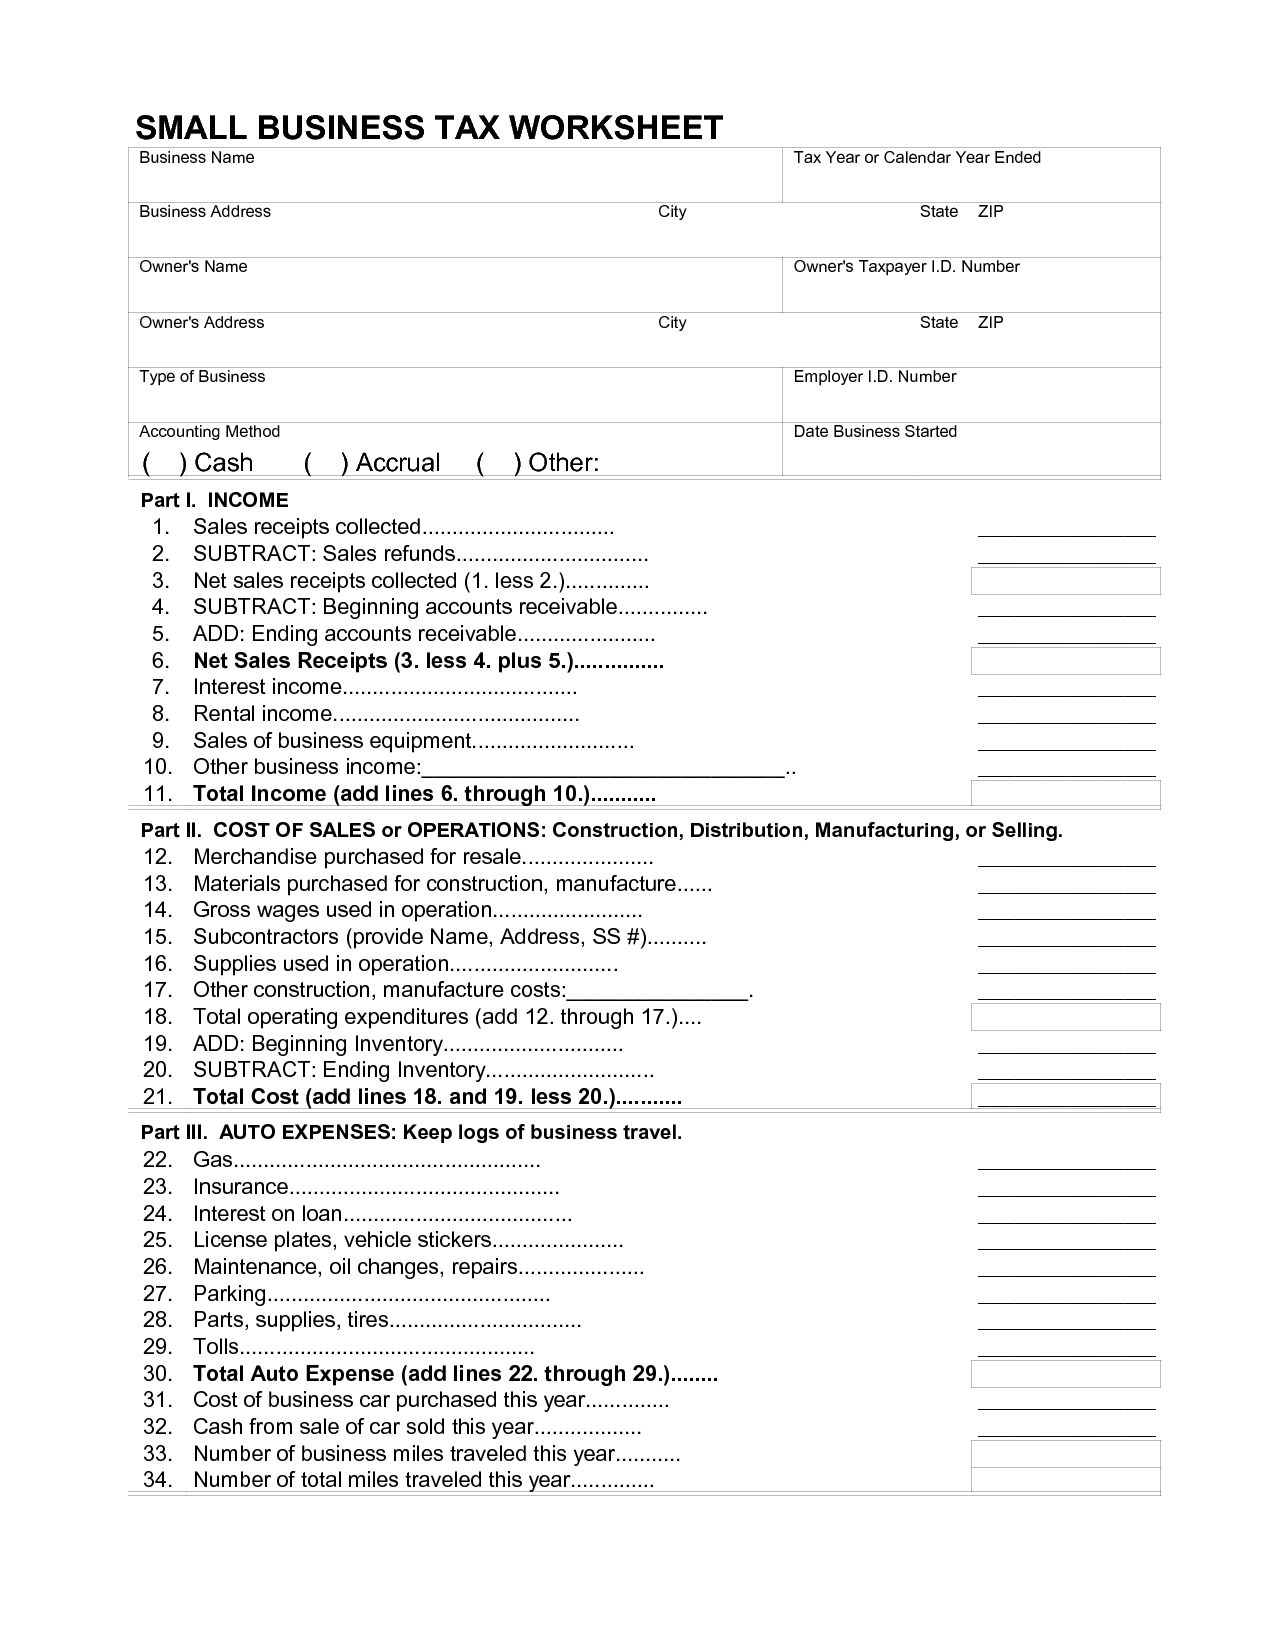 8 Best Images of Tax Itemized Deduction Worksheet - IRS Form 1040 Itemized Deductions ...